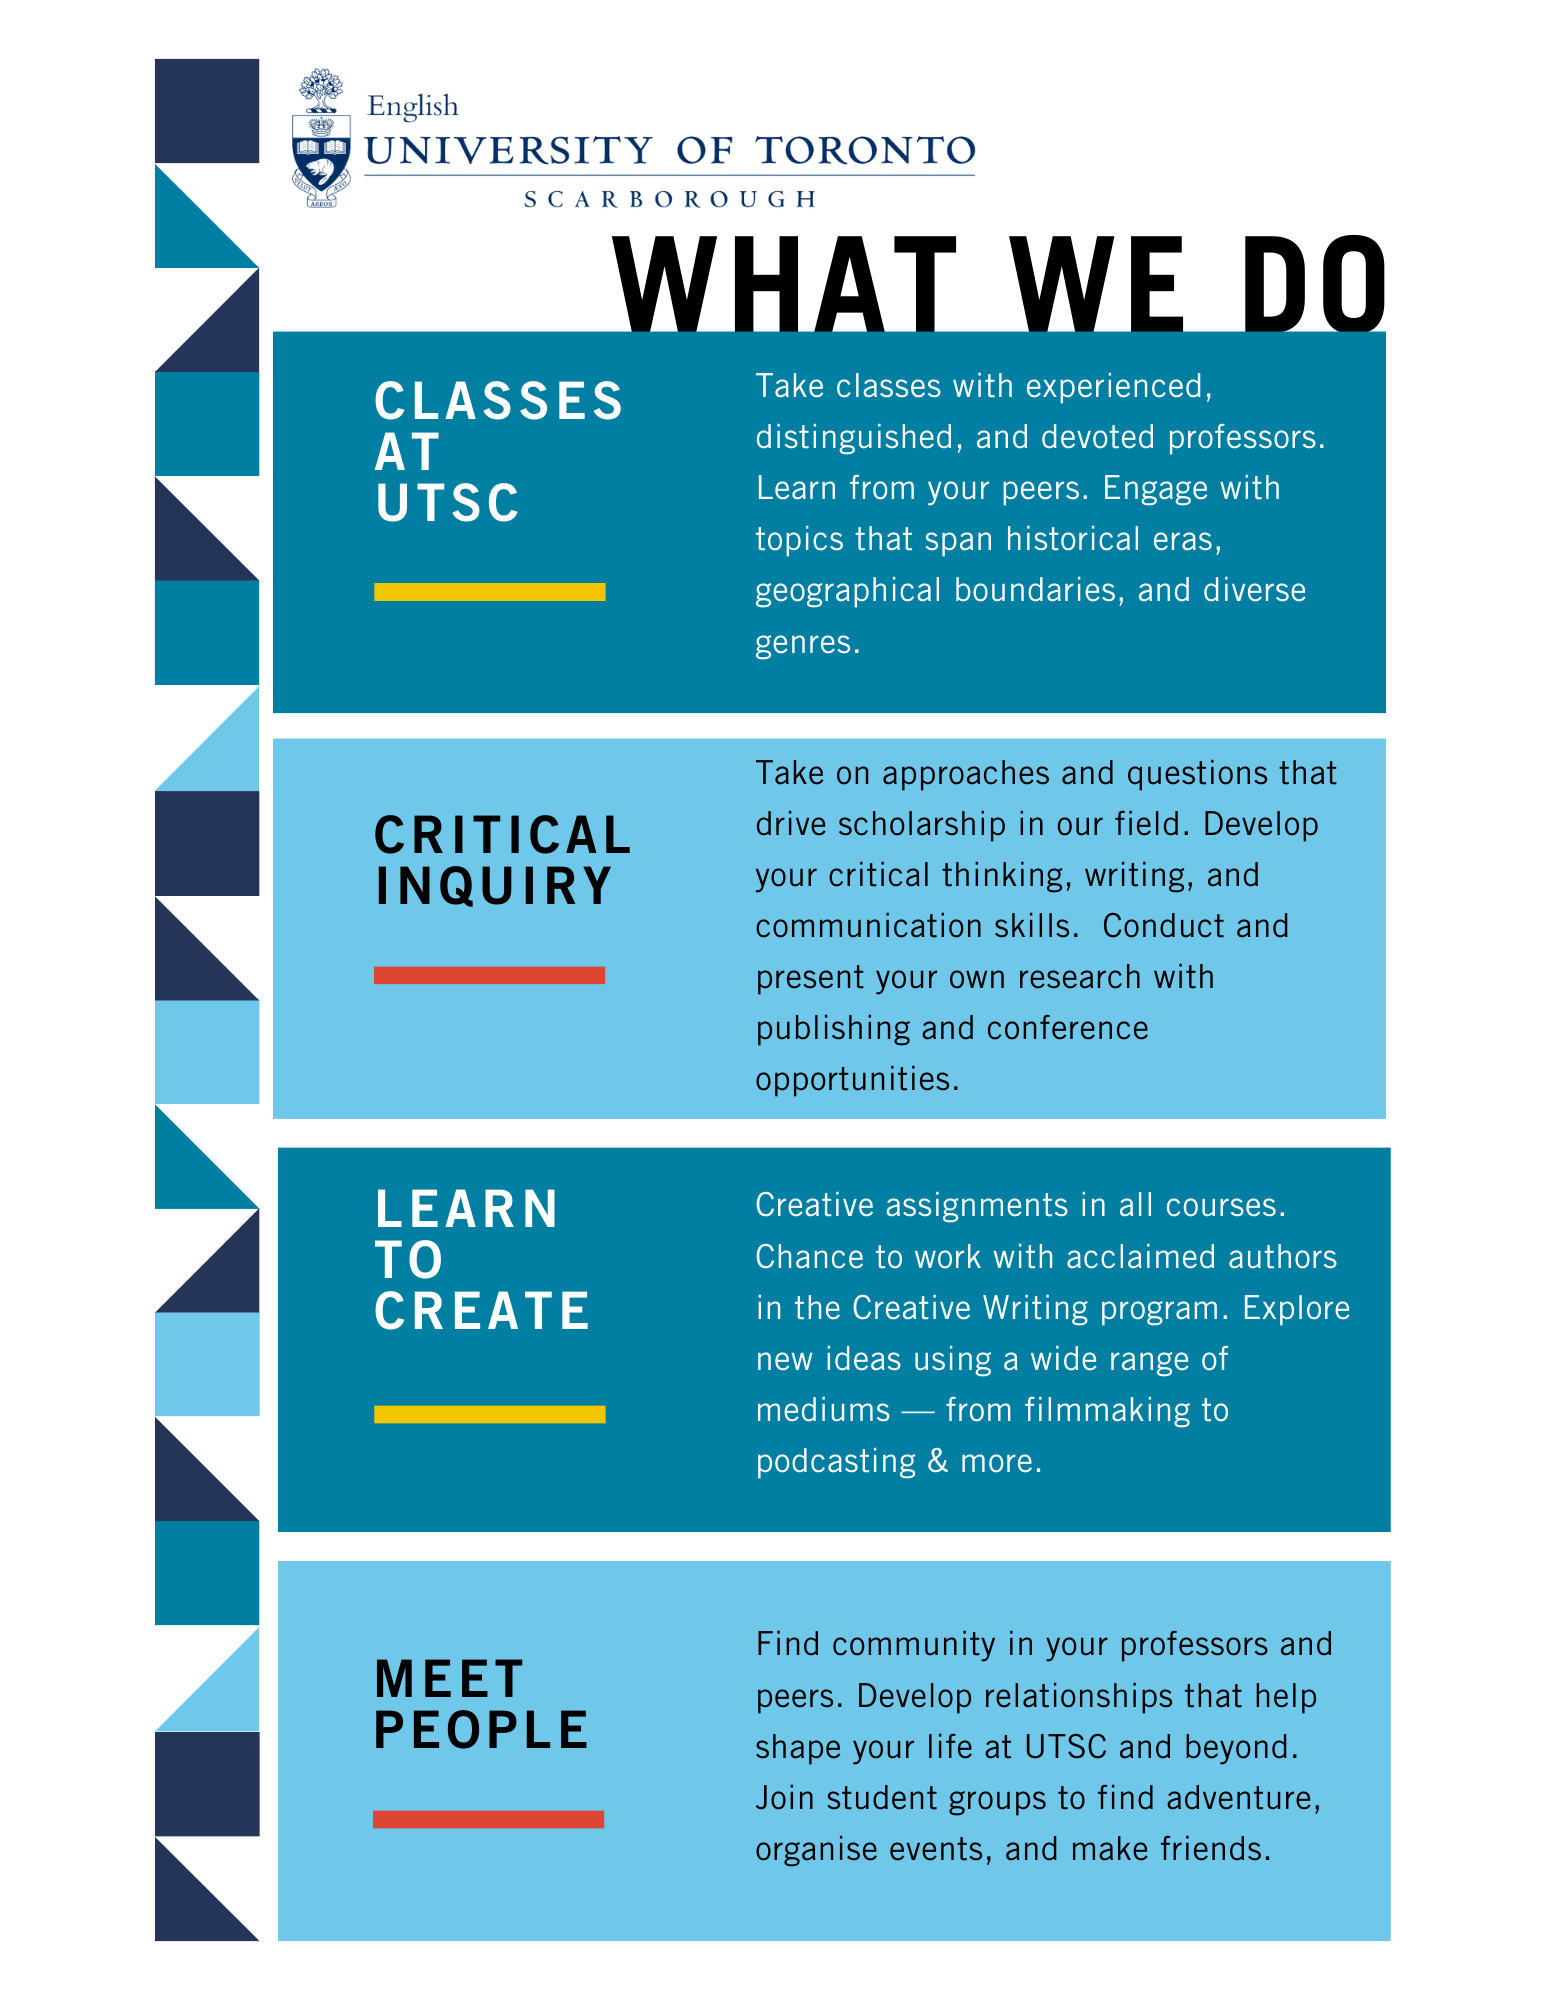 Poster titled "What We Do". 1. Classes at UTSC: Take classes with distinguished professors. Learn from your peers. Engage with diverse texts. 2. Critical Inquiry: Develop critical thinking, writing, and communication skills. 3. Learn to Create: Creative assignments in courses. Work with acclaimed authors in the creative writing program.  4. Meet People: Grow your community with professors and fellow students. 